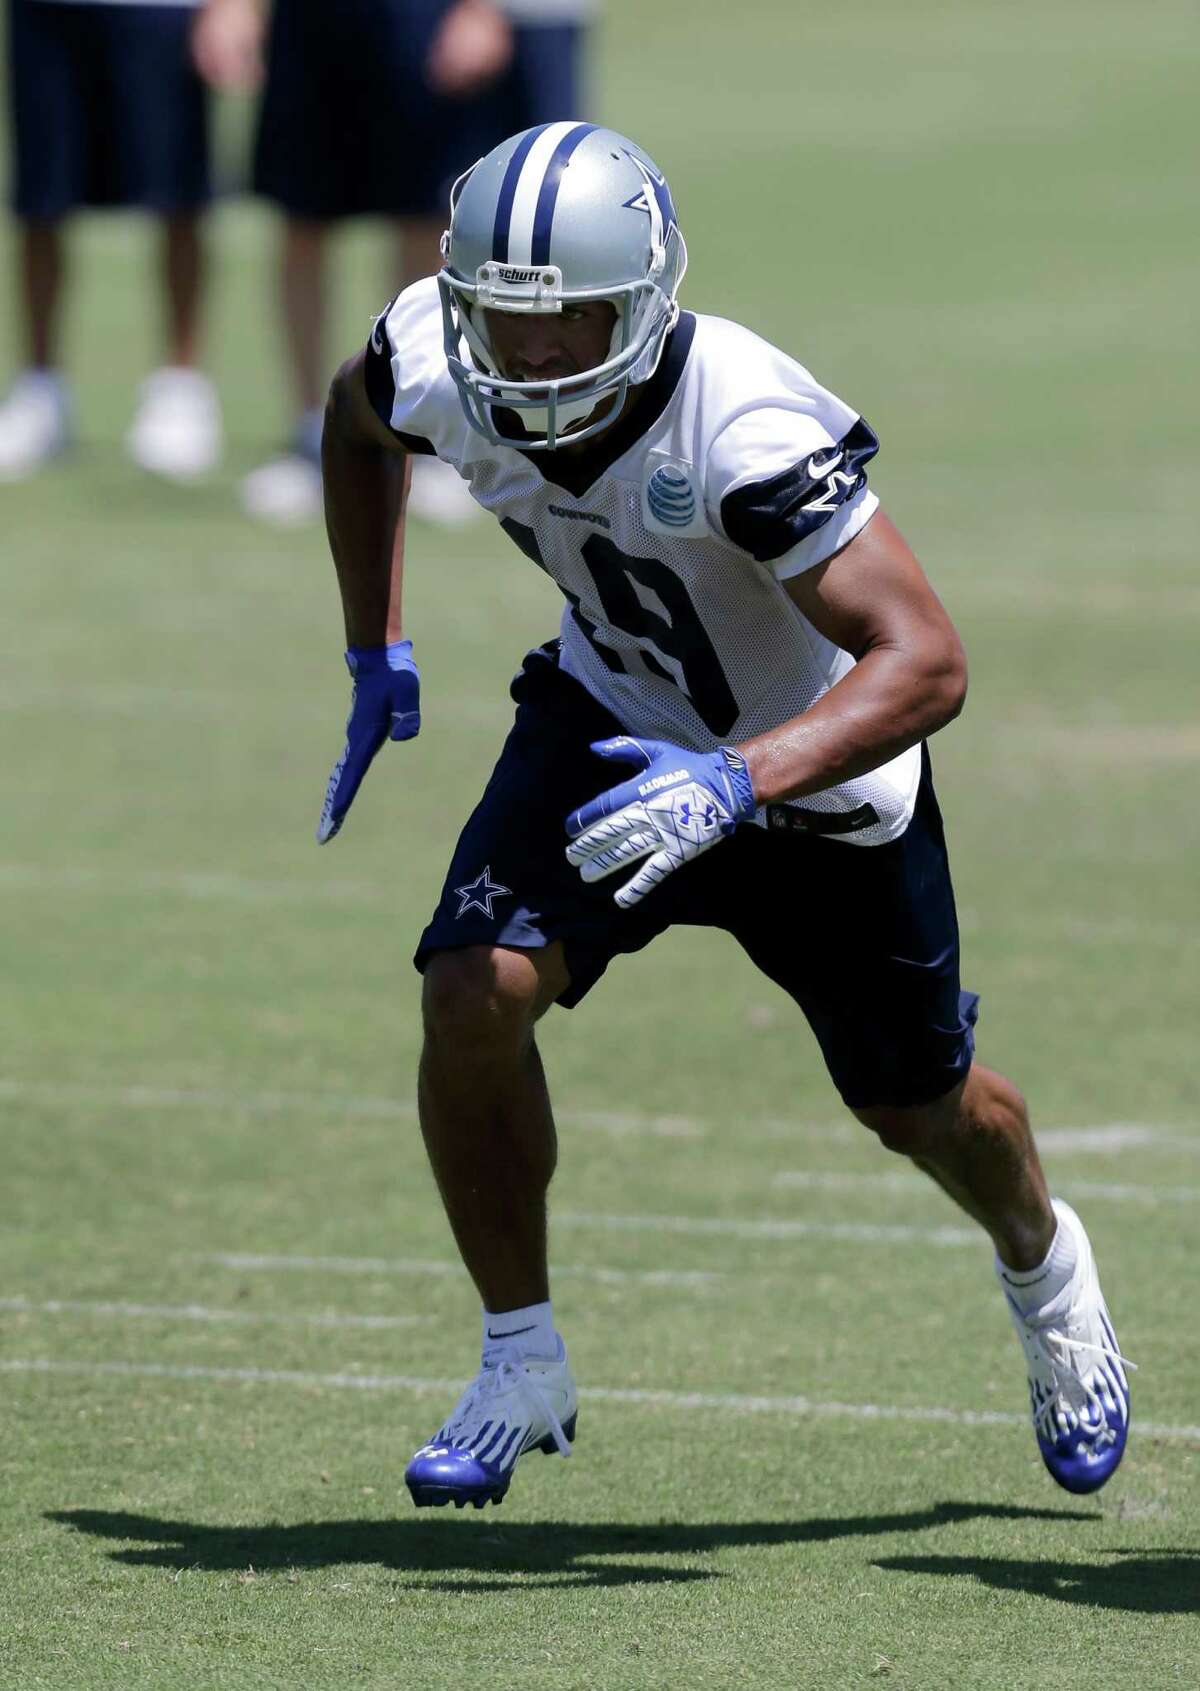 Receiver Miles Austin (above) and running back DeMarco Murray will look to stay healthy after two injury-prone seasons.